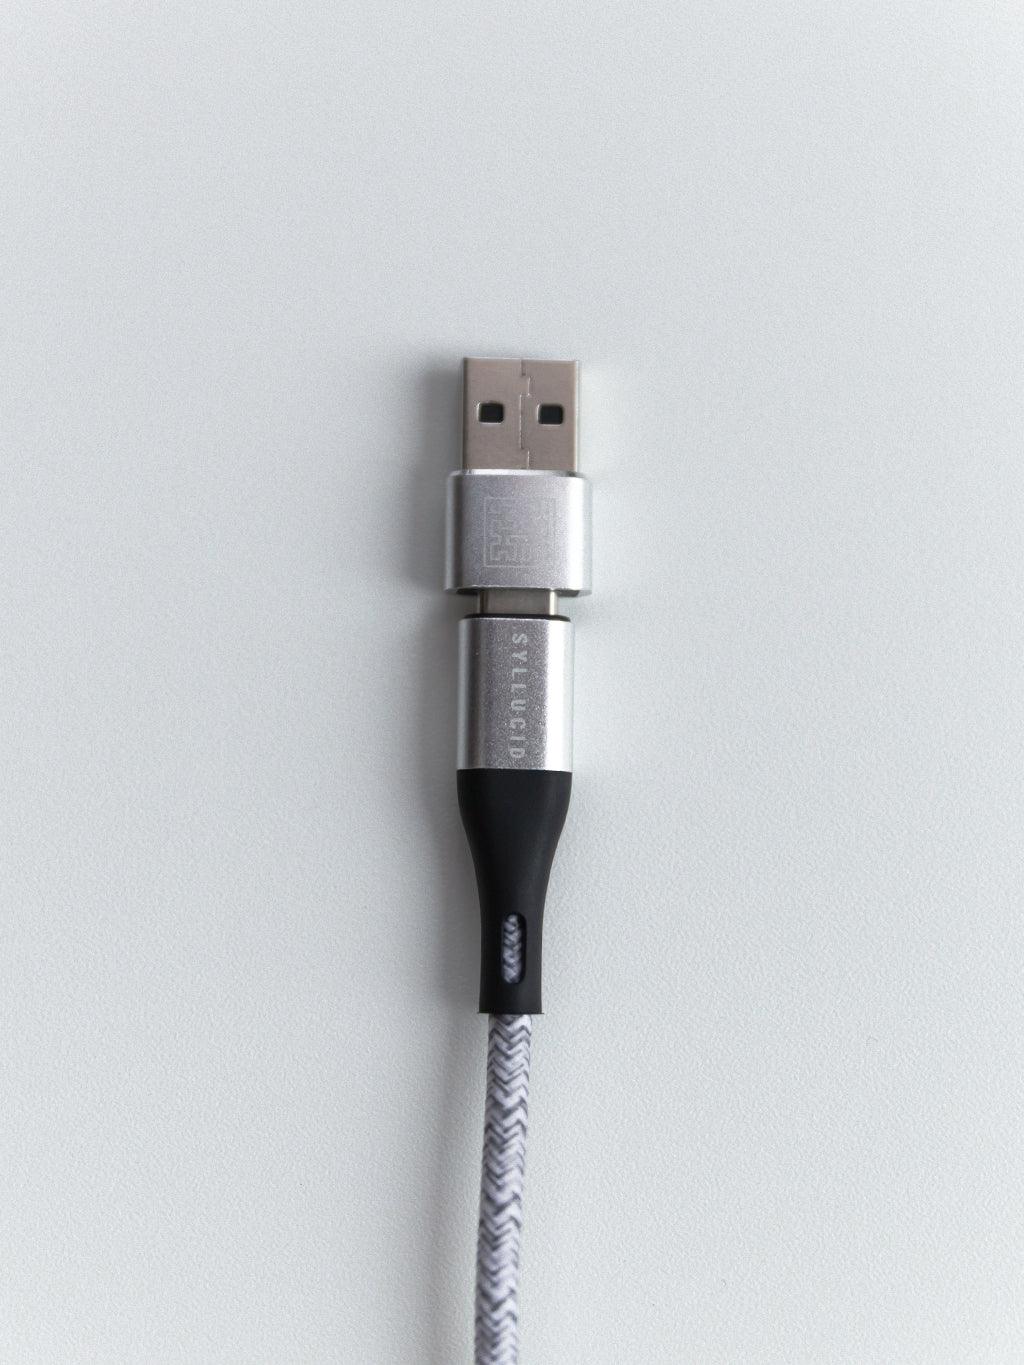 USB A to C adapter - Syllucid